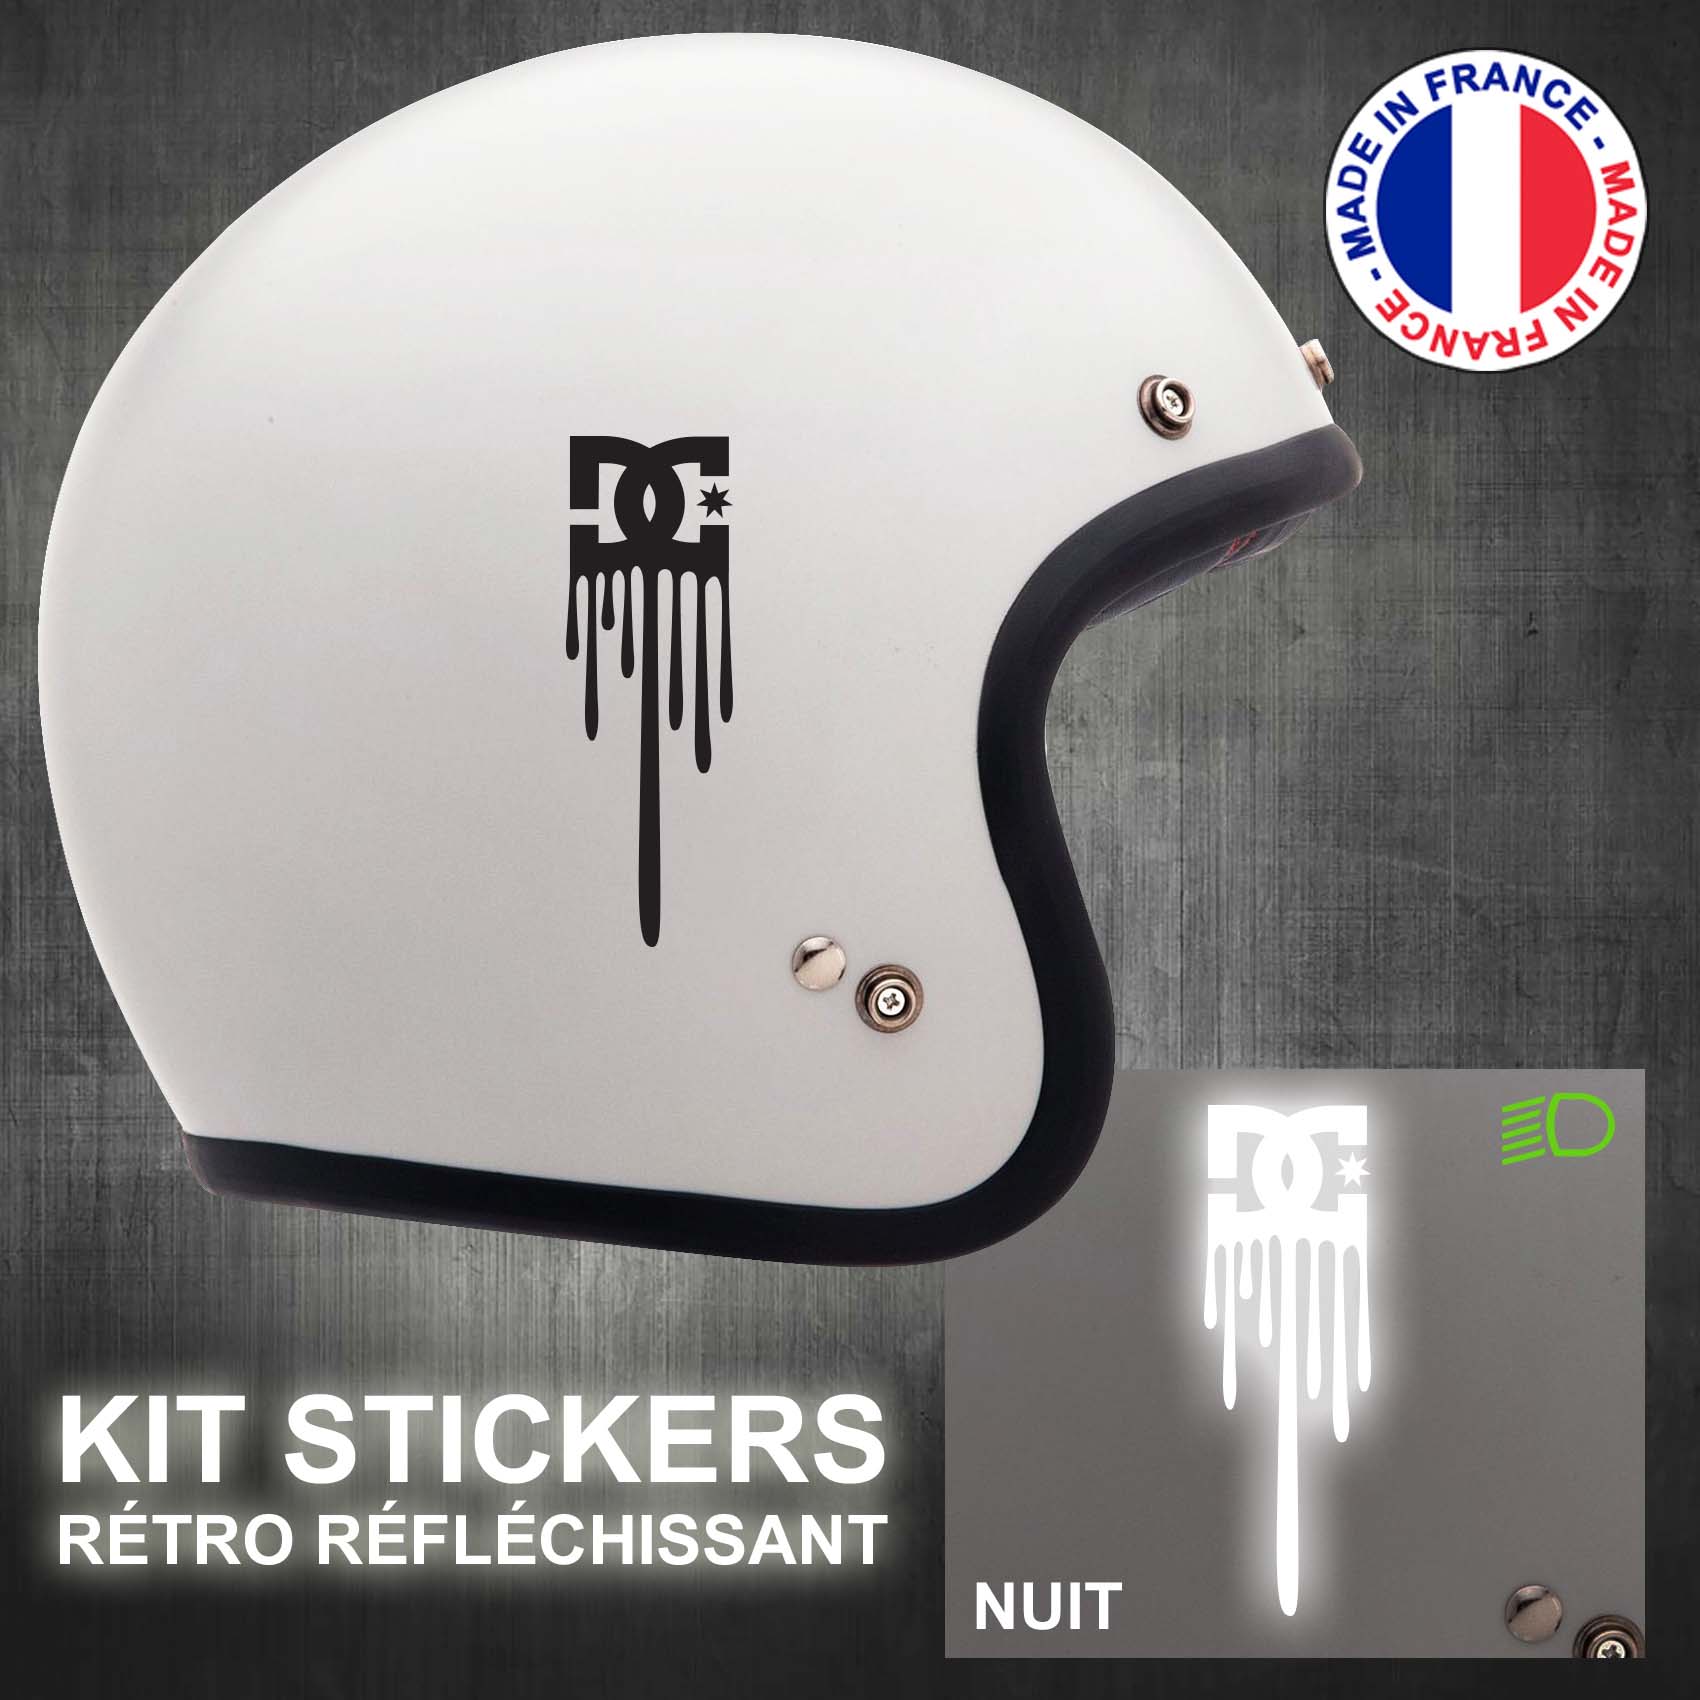 stickers-casque-moto-dc-shoes-ref2-retro-reflechissant-autocollant-moto-velo-tuning-racing-route-sticker-casques-adhesif-scooter-nuit-securite-decals-personnalise-personnalisable-min